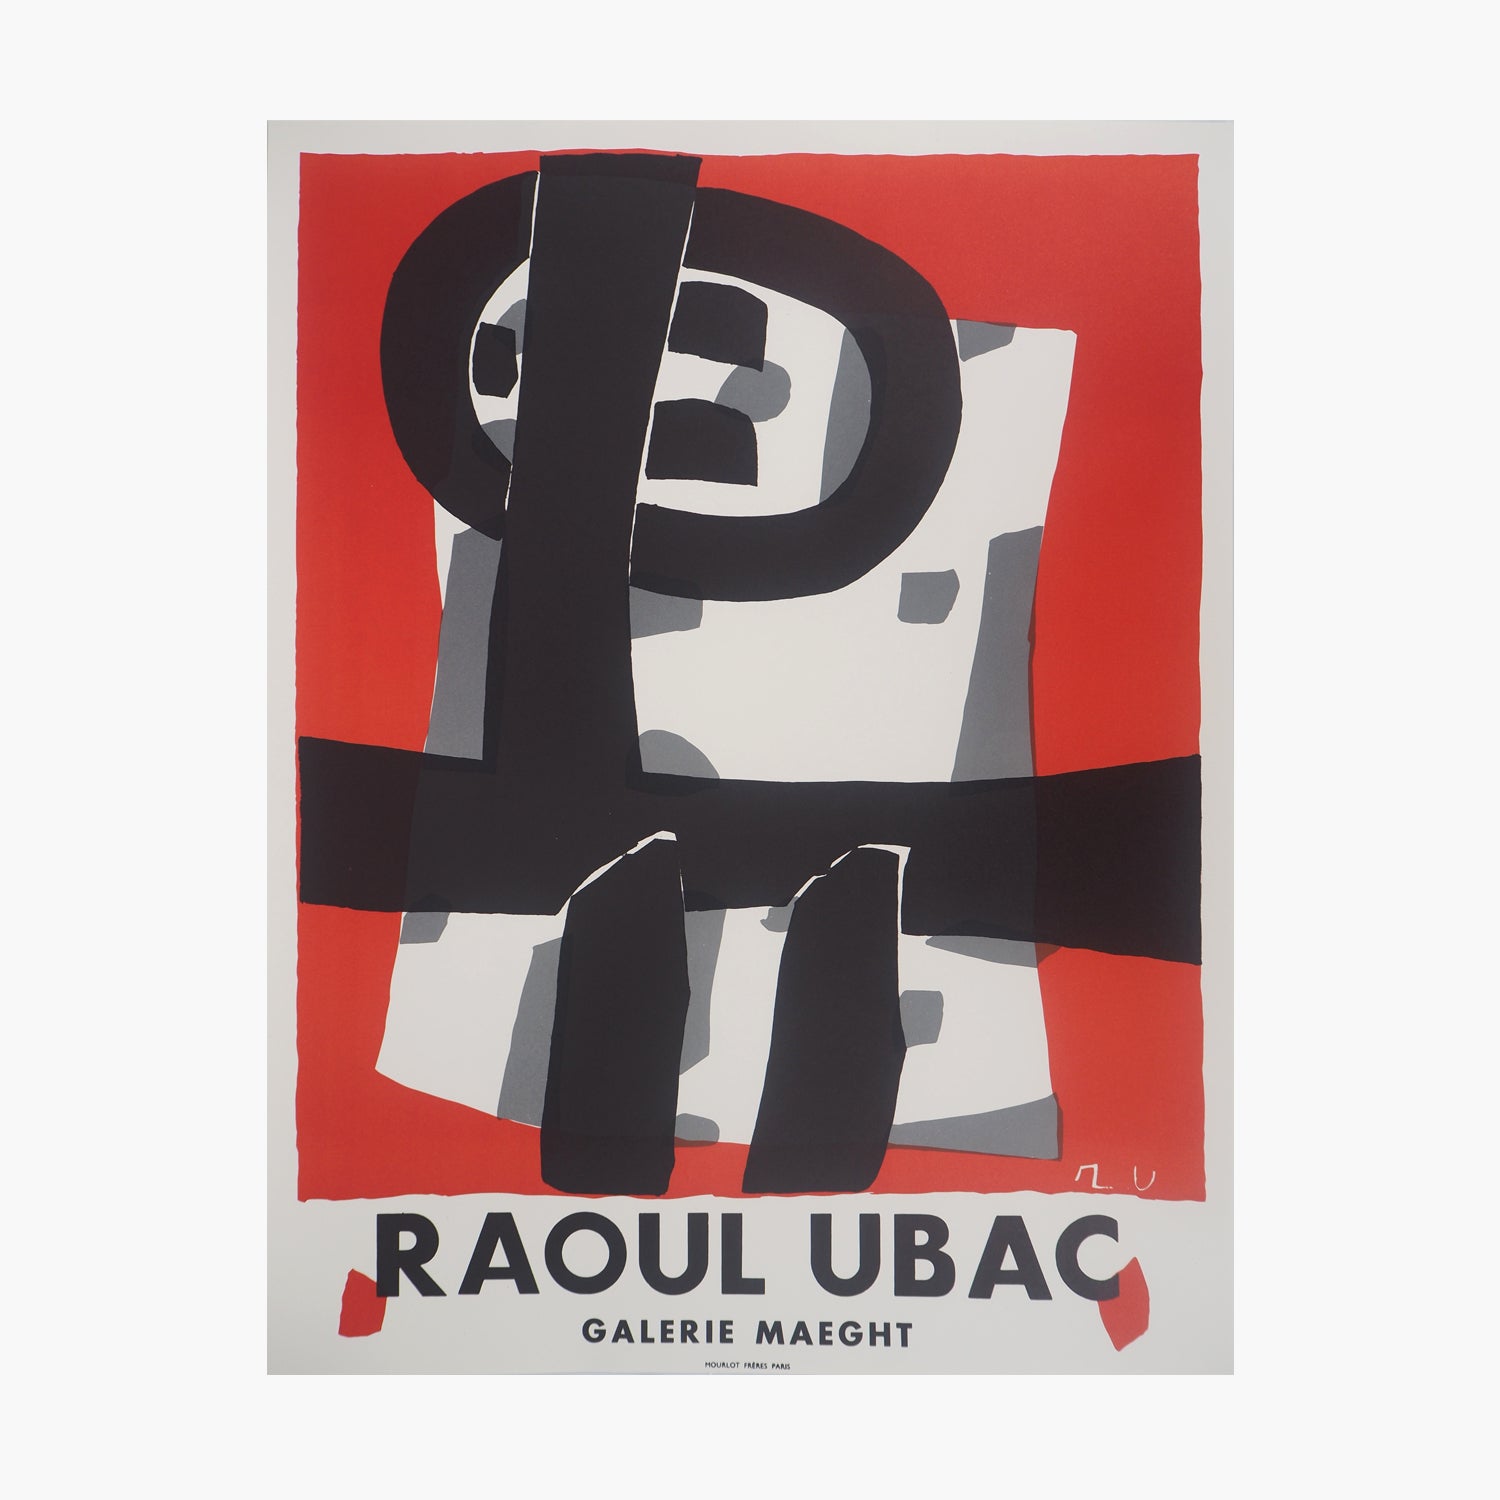 Raoul Ubac ‘EXPOSITION 1950’ Poster from Galerie Maeght